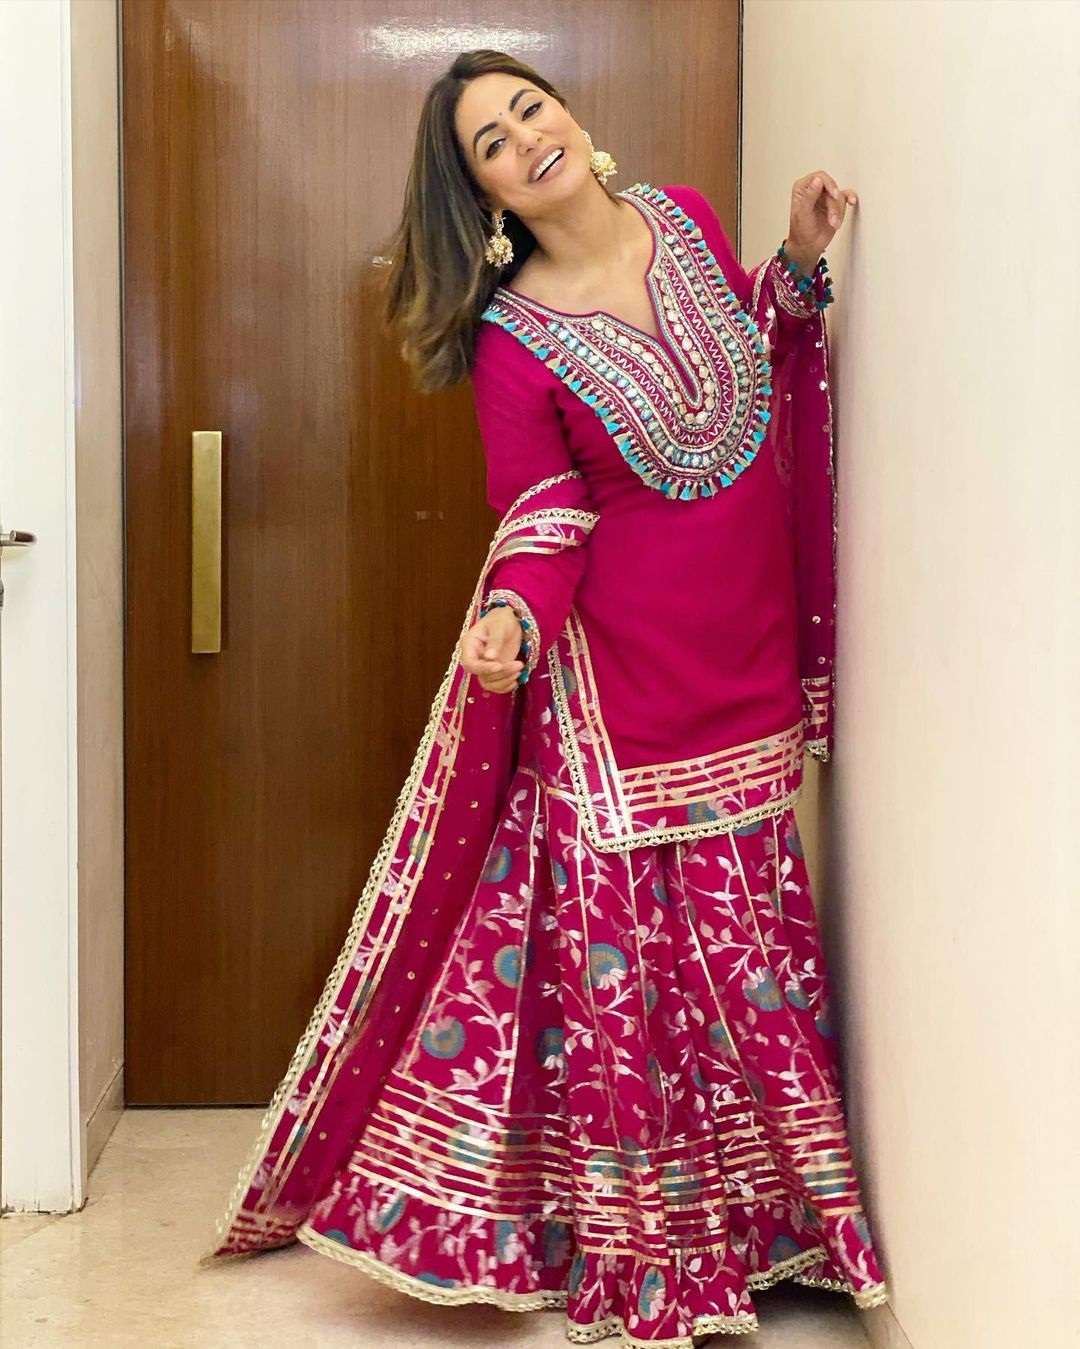 Hina Khan's Pink Modern Floral Sharara Suit Is An Ethnic Inspiration For Every Girl 4